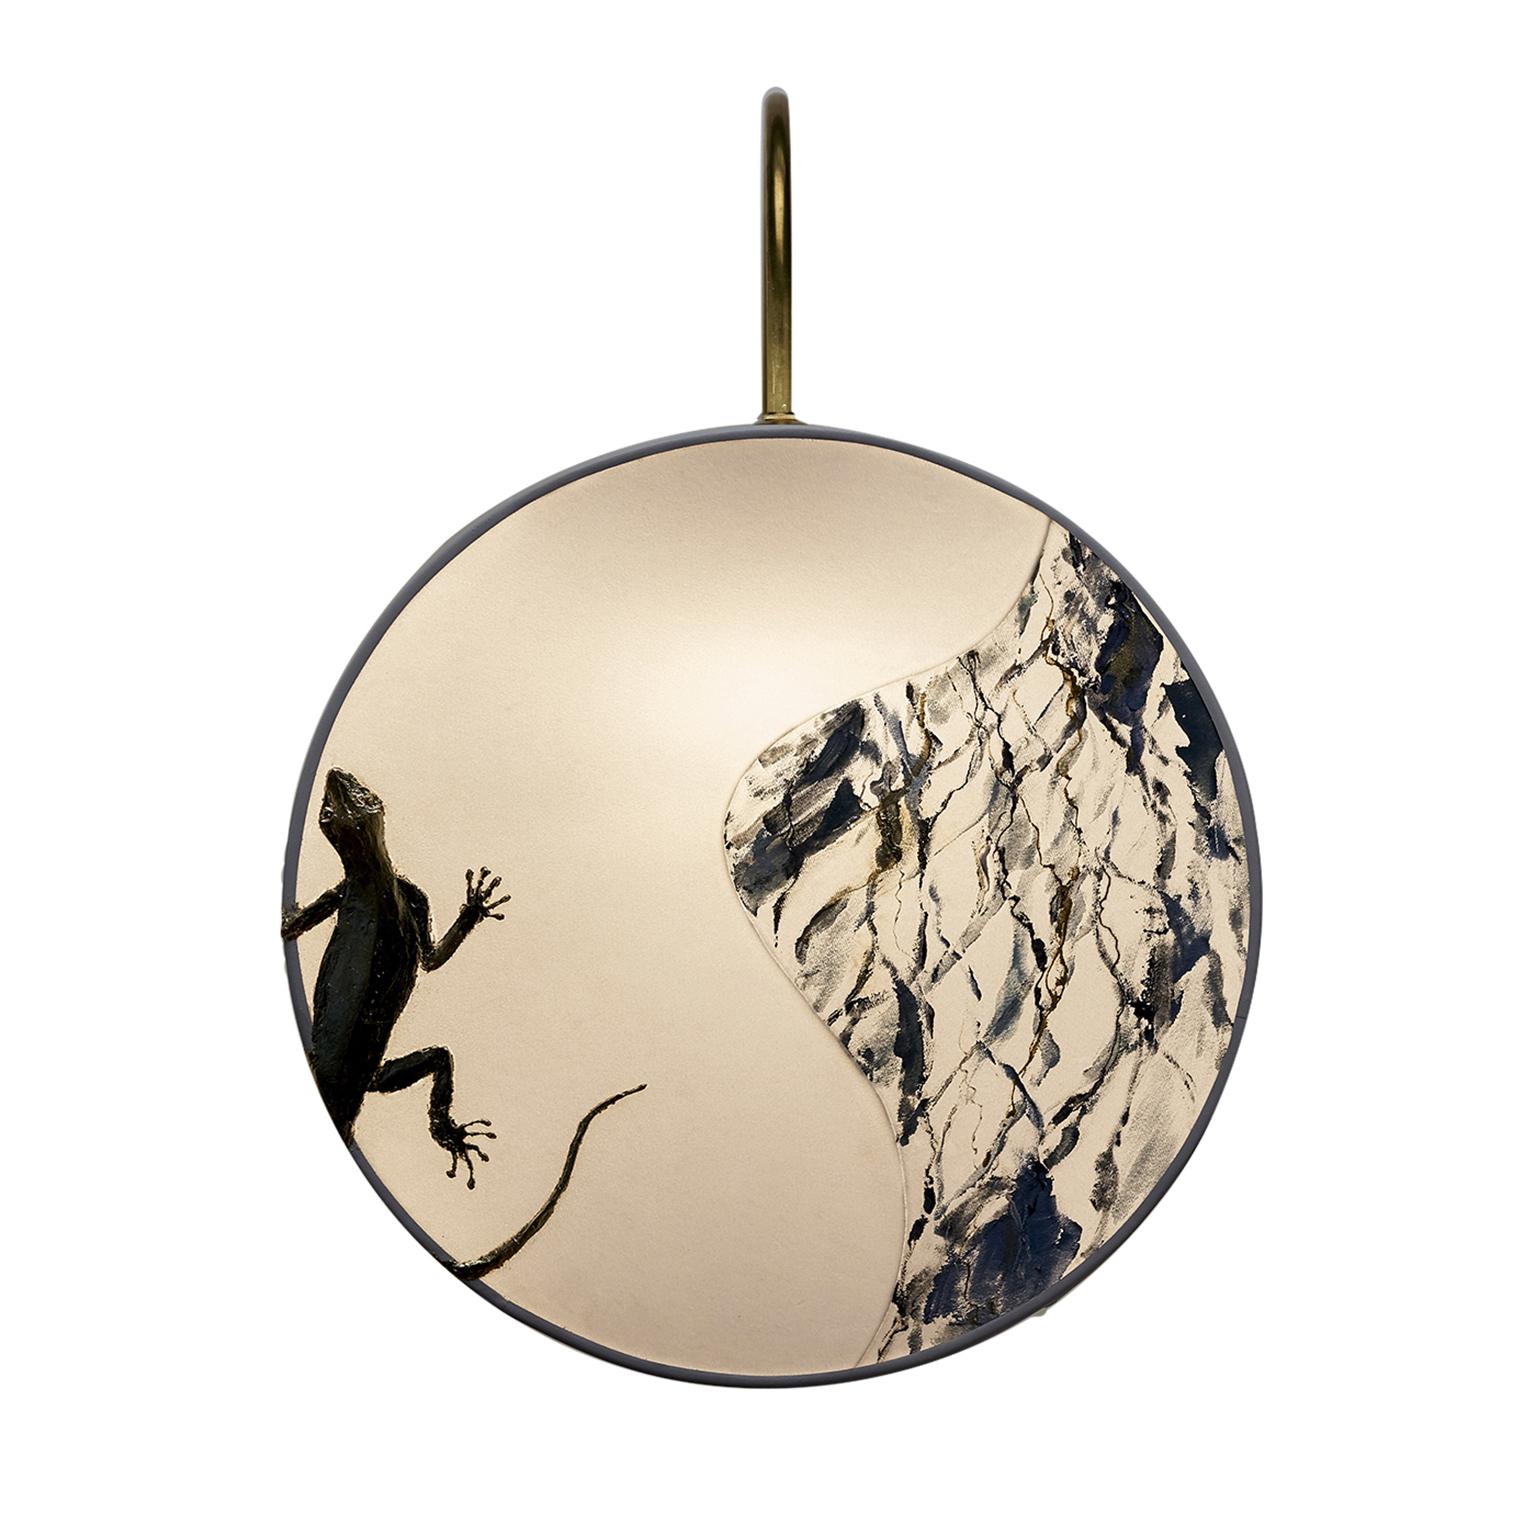 Secret World collection. Inspired by the Chambers of treasures and original objects of European history. The sconce is composed of a small natural brass structure supporting the lampshade, consisting of two round disc in ivory velvet with details in